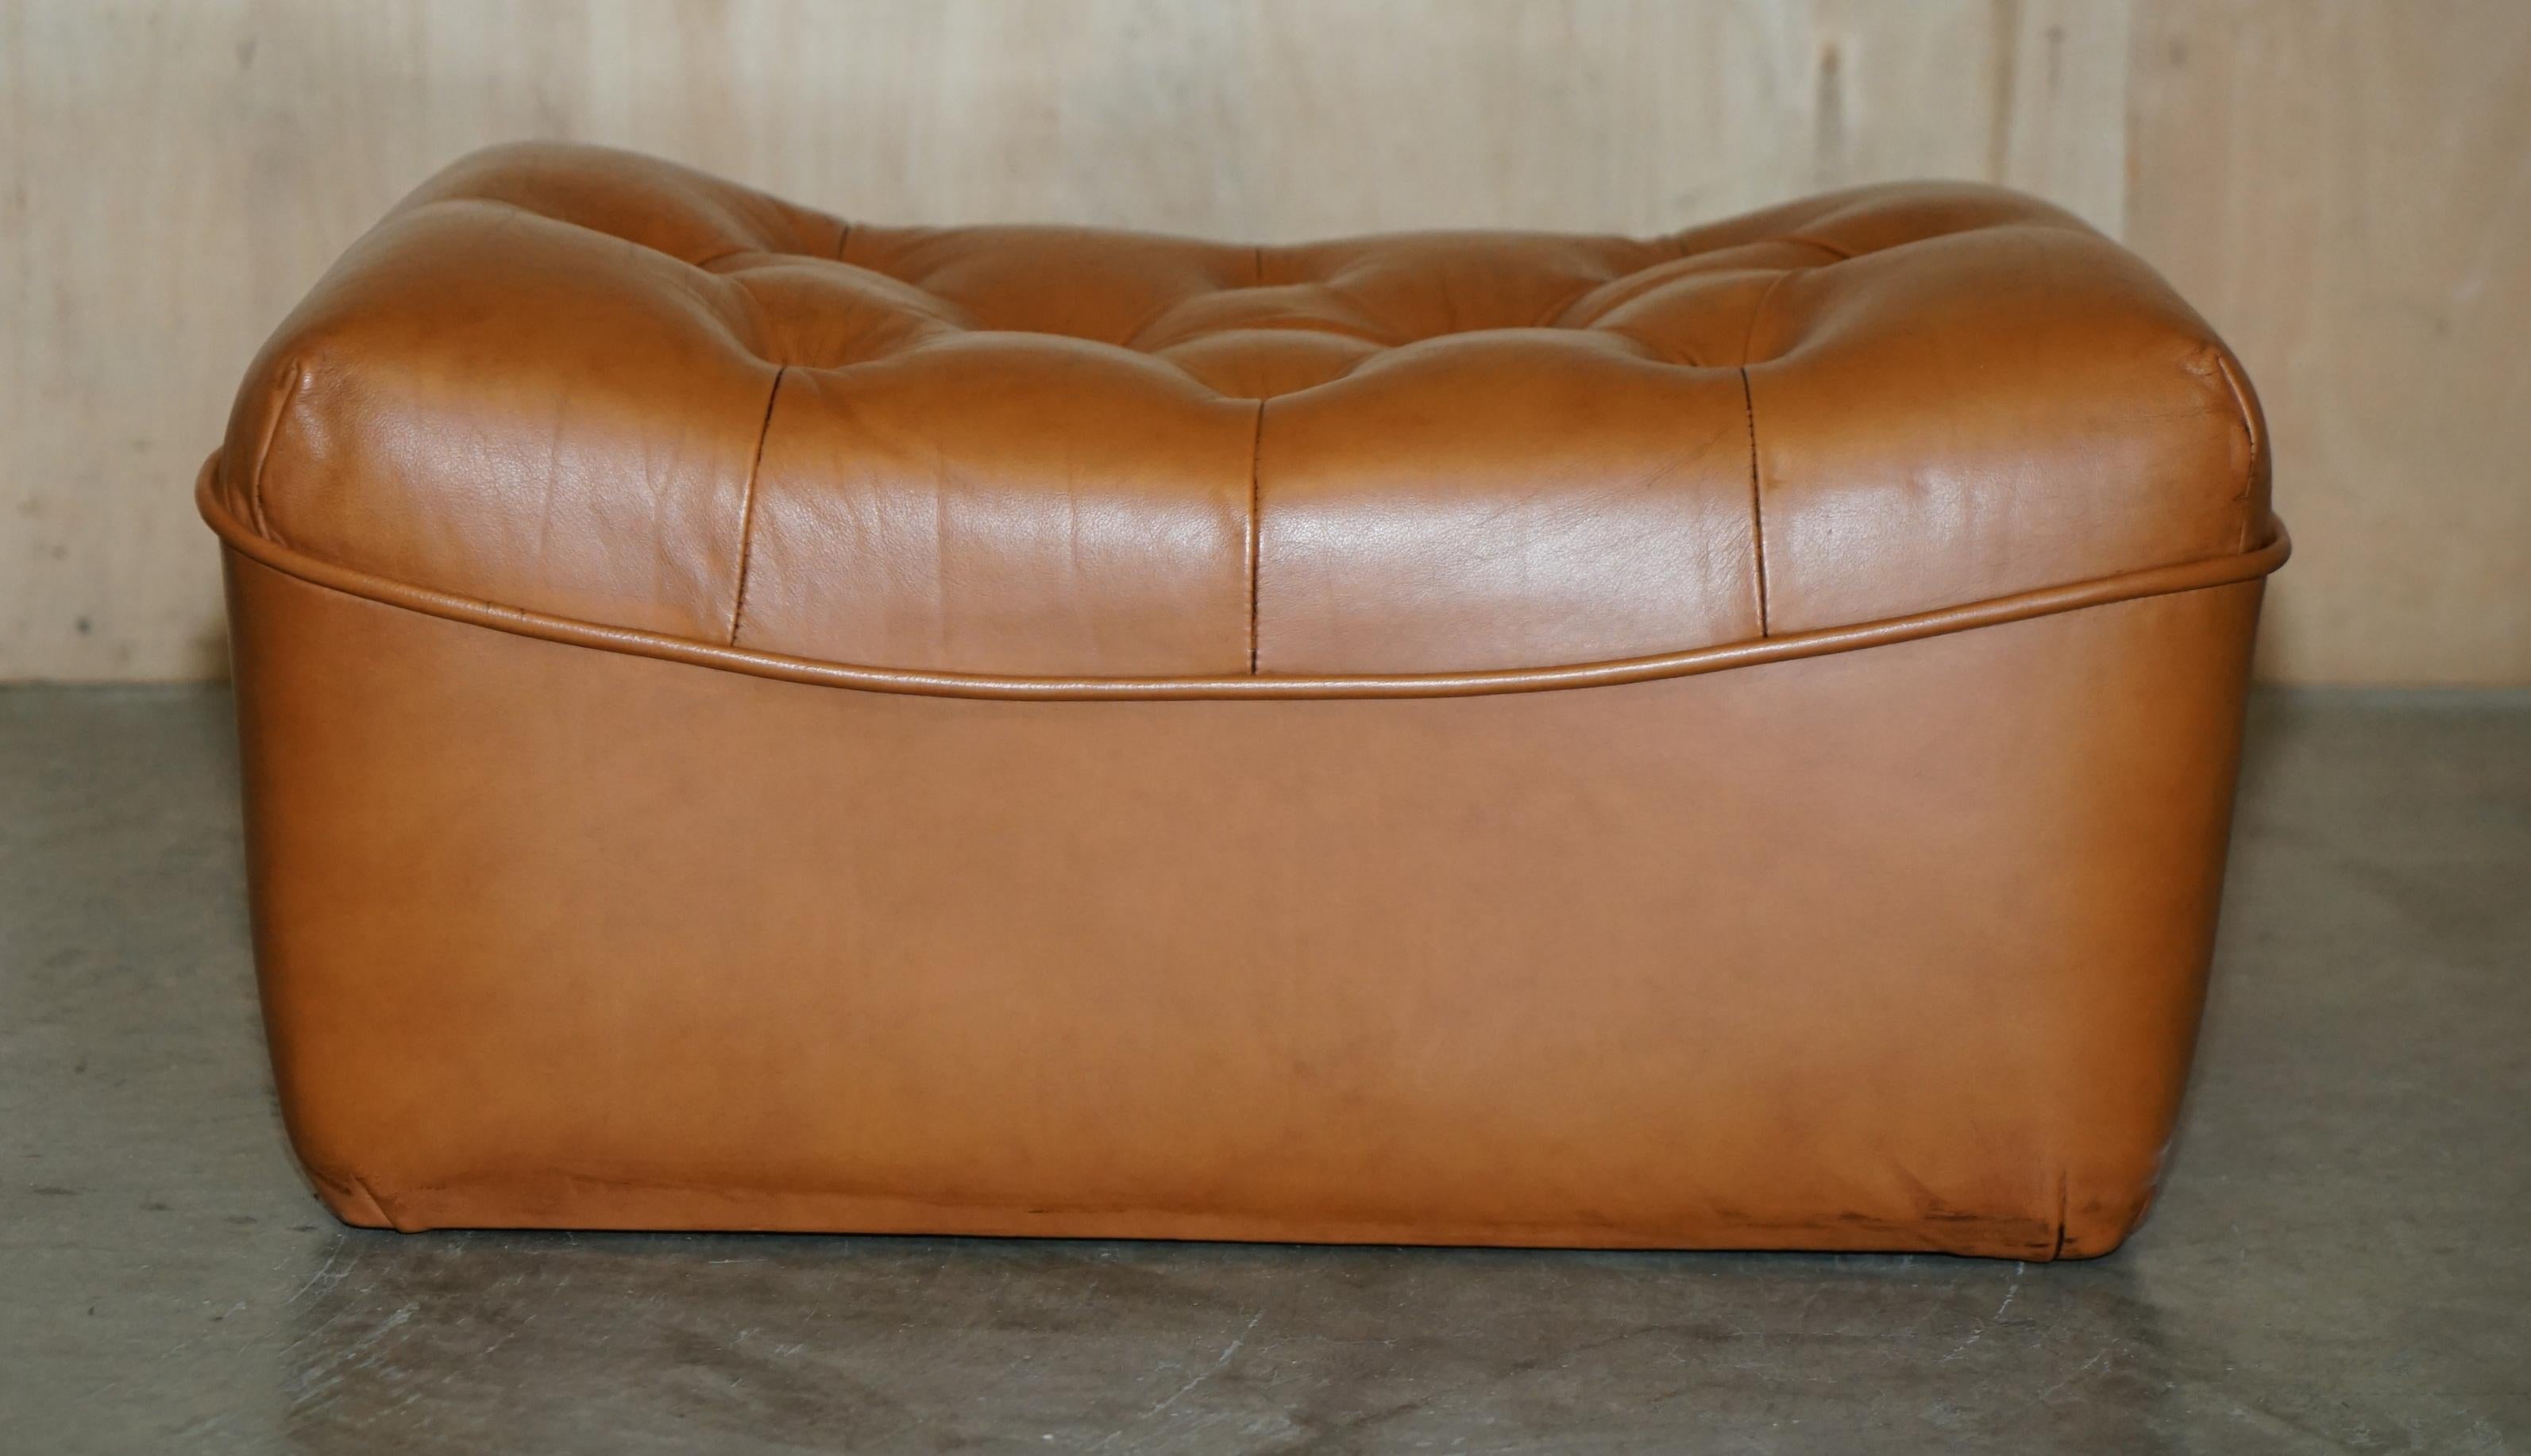 FINE VINTAGE MiD CENTURY MODERN TAN BROWN LEATHER CHESTERFIELD TUFTED FOOTSTOOL 1